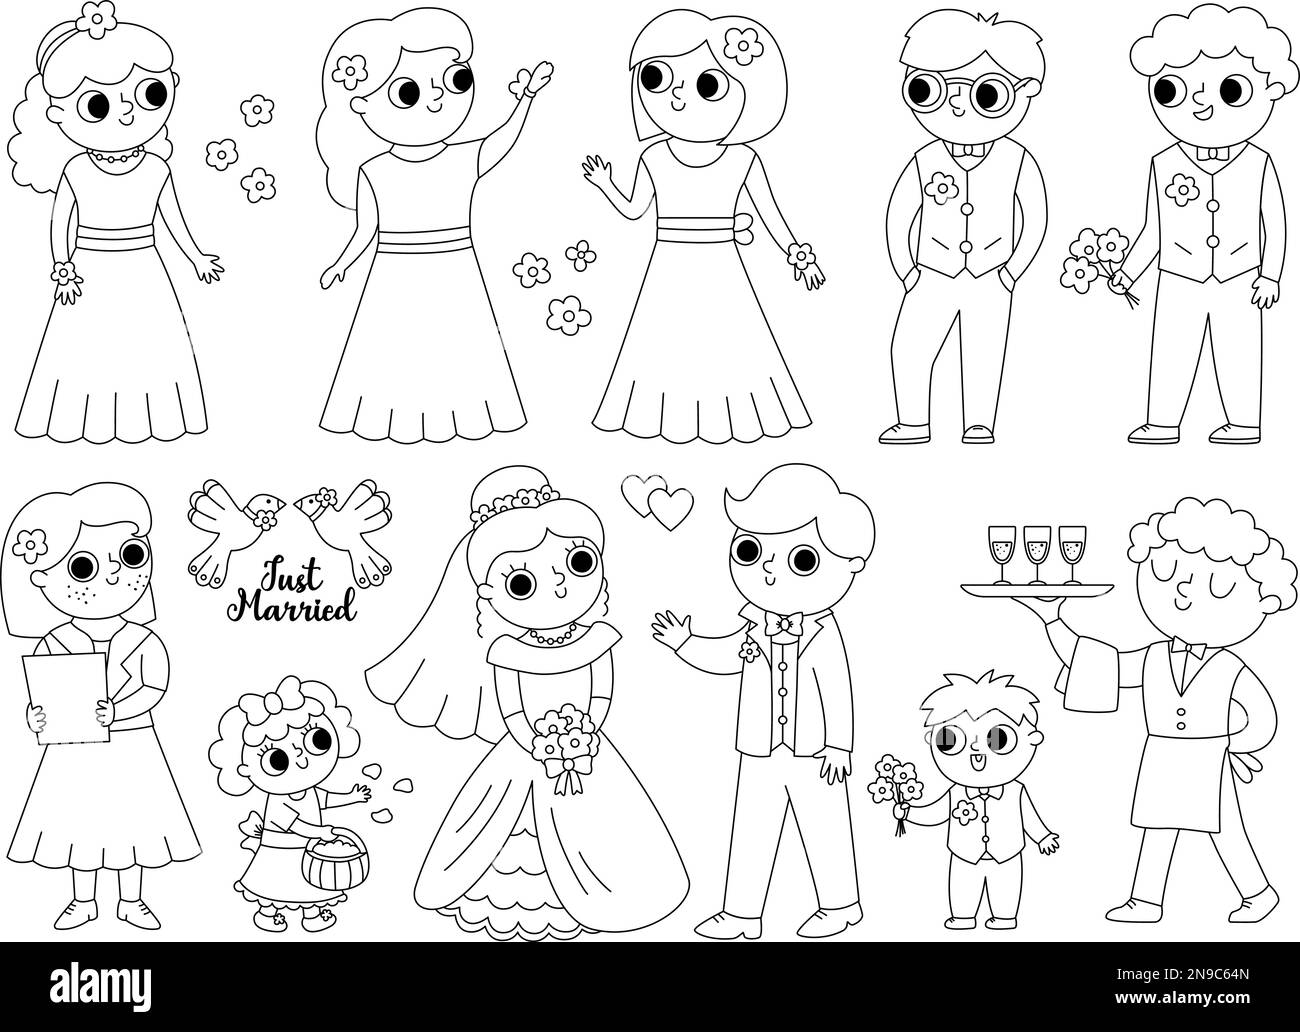 Vector black and white set with bride, groom and their guests. Cute just married couple with bridesmaids, bridegrooms, children, waiter, registrar. We Stock Vector